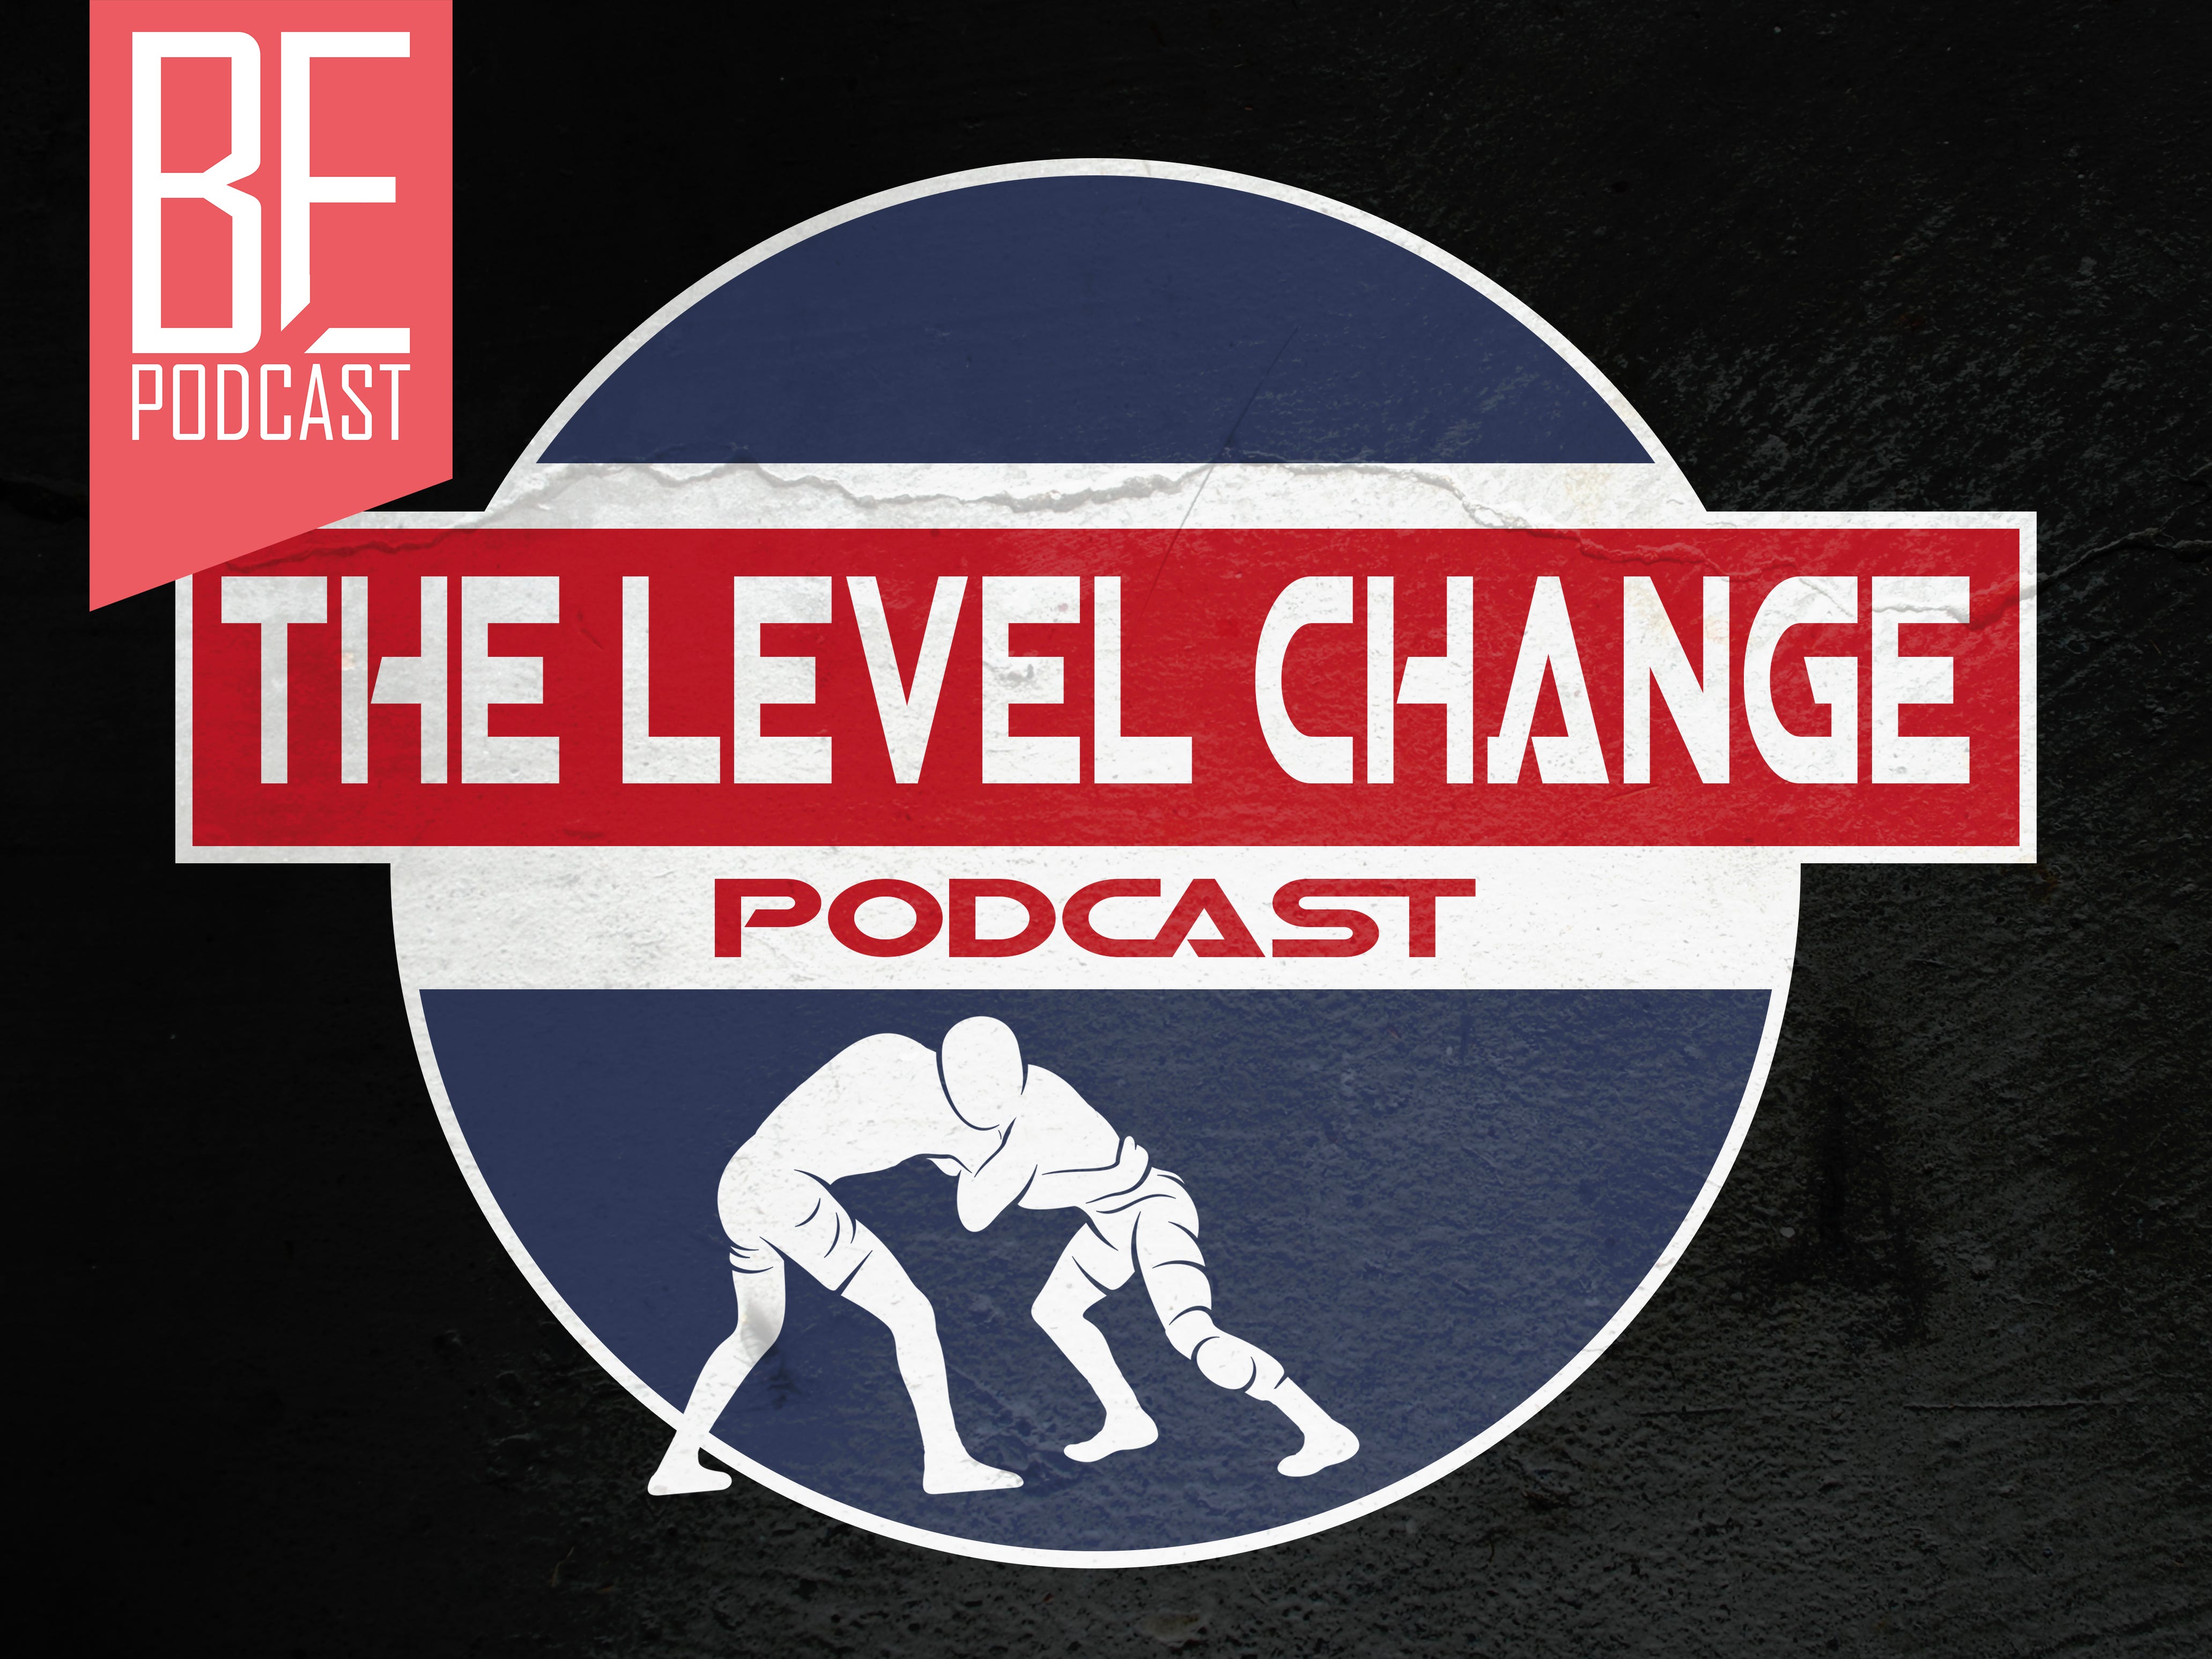 mma, ufc, mma podcast, ufc podcast, the level change podcast, Stephie Haynes, Victor Rodriguez, combat sports, cage fighting, mma news, ufc news, 